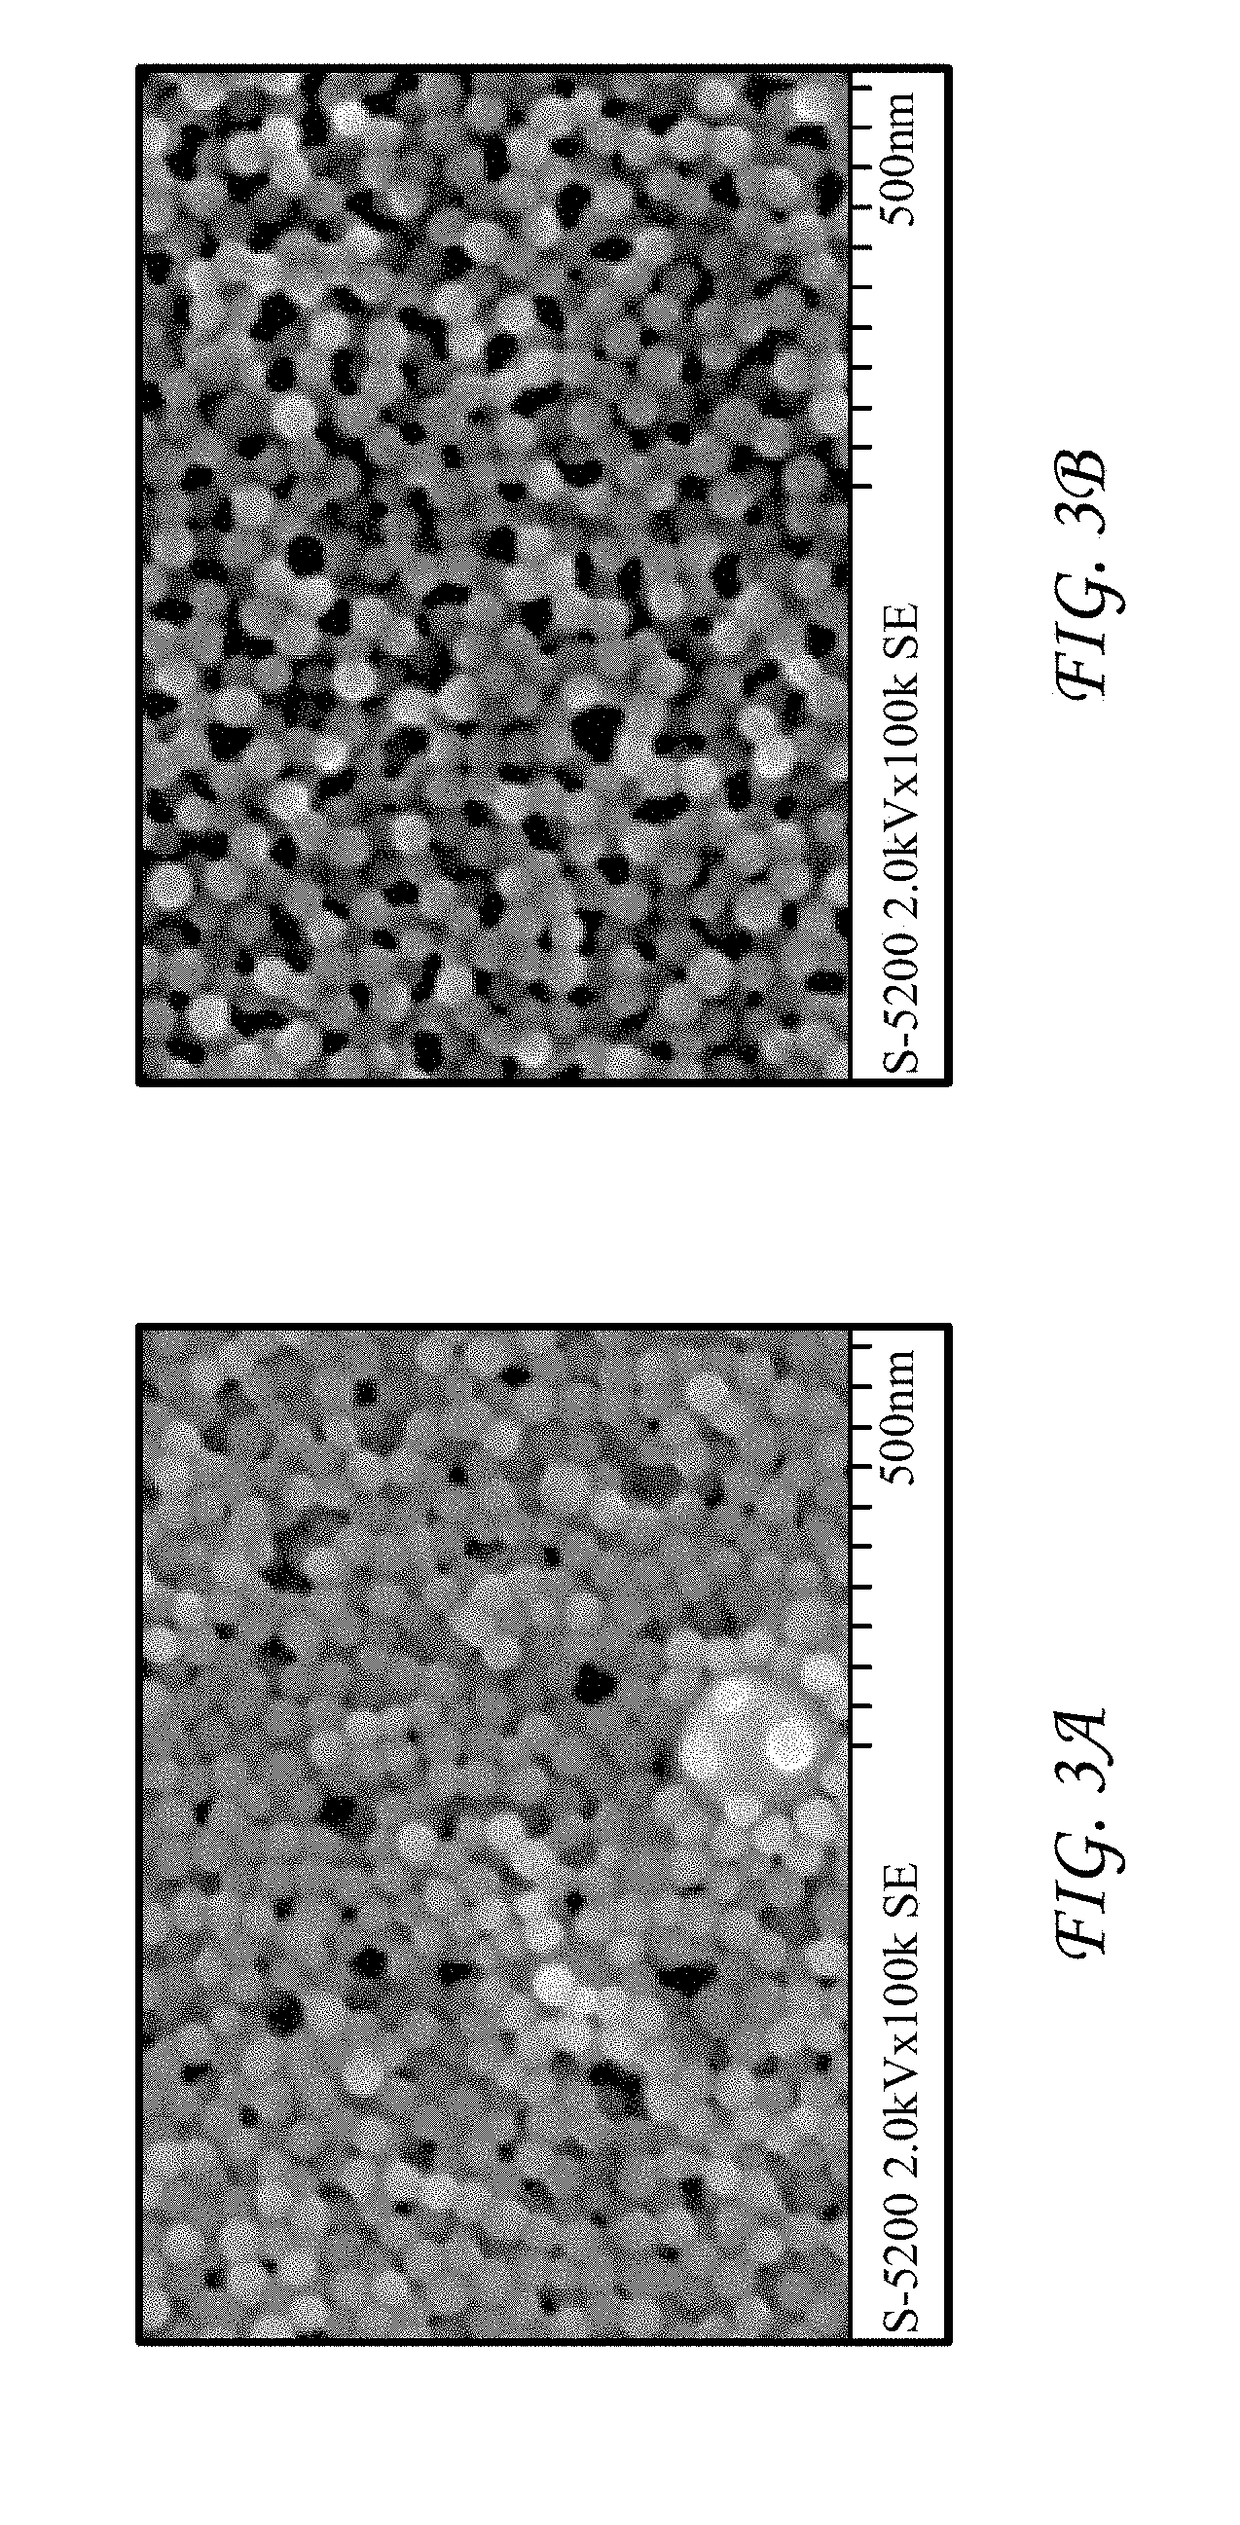 Self-assembly method for core/shell nanoparticles with enhanced emission